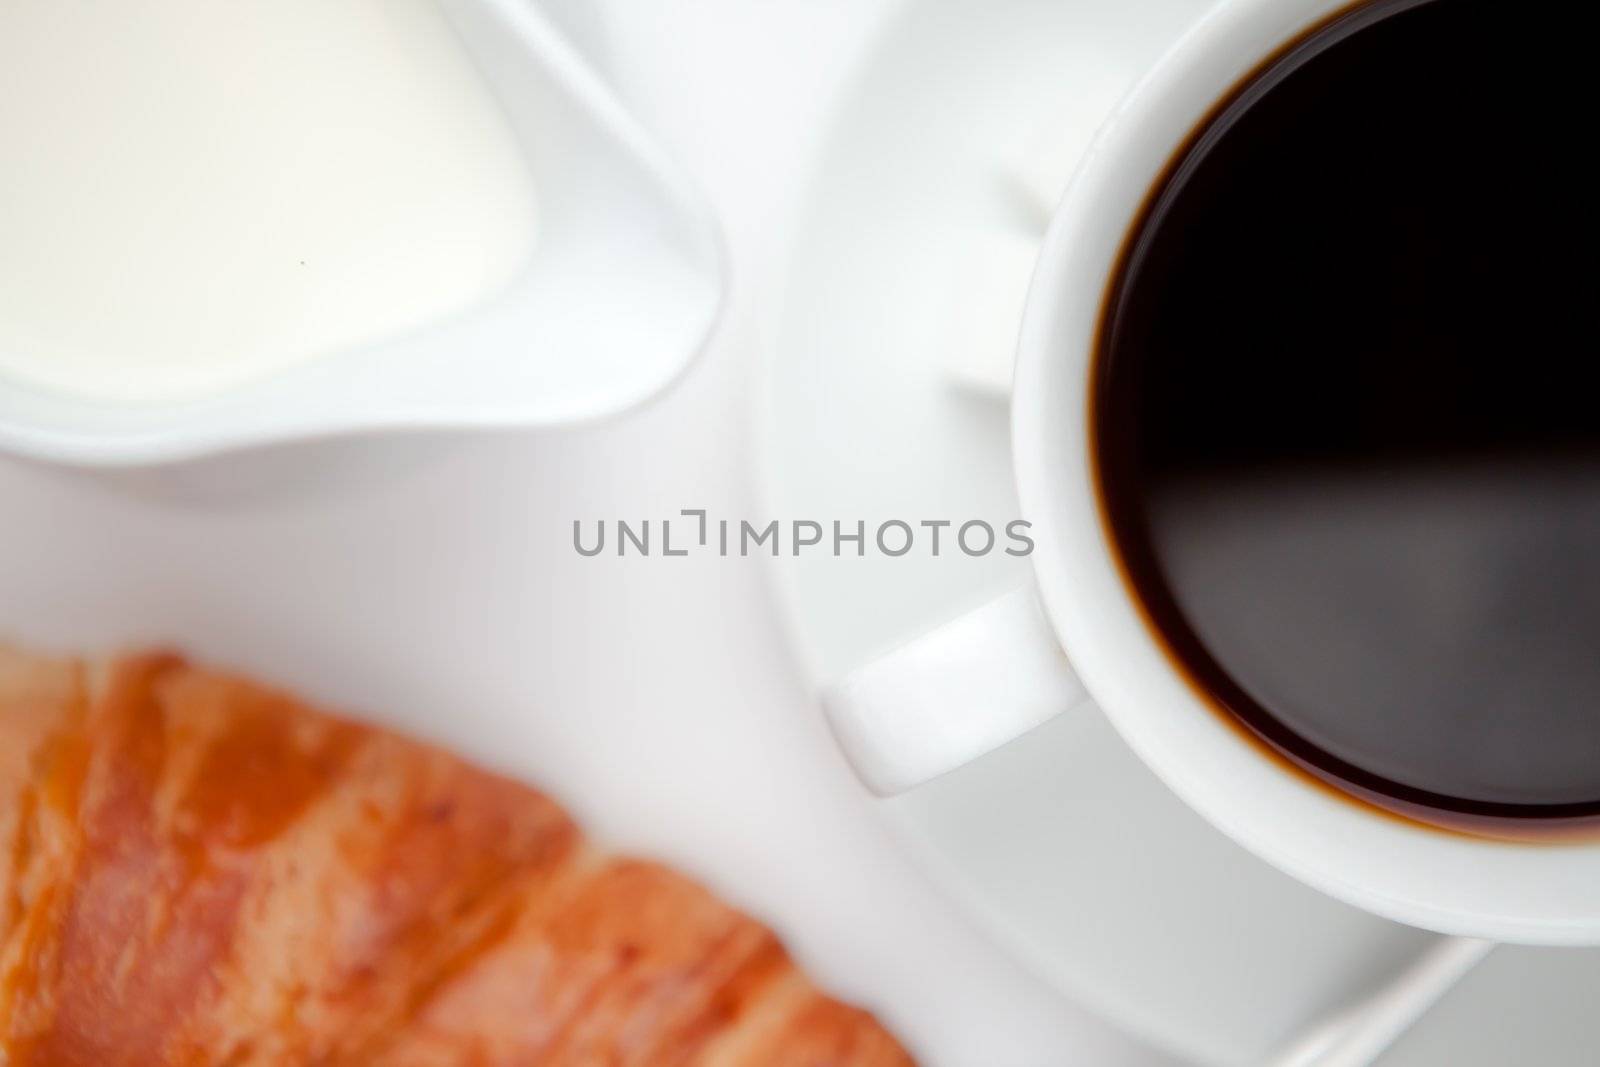 Coffee with croissant against a white background